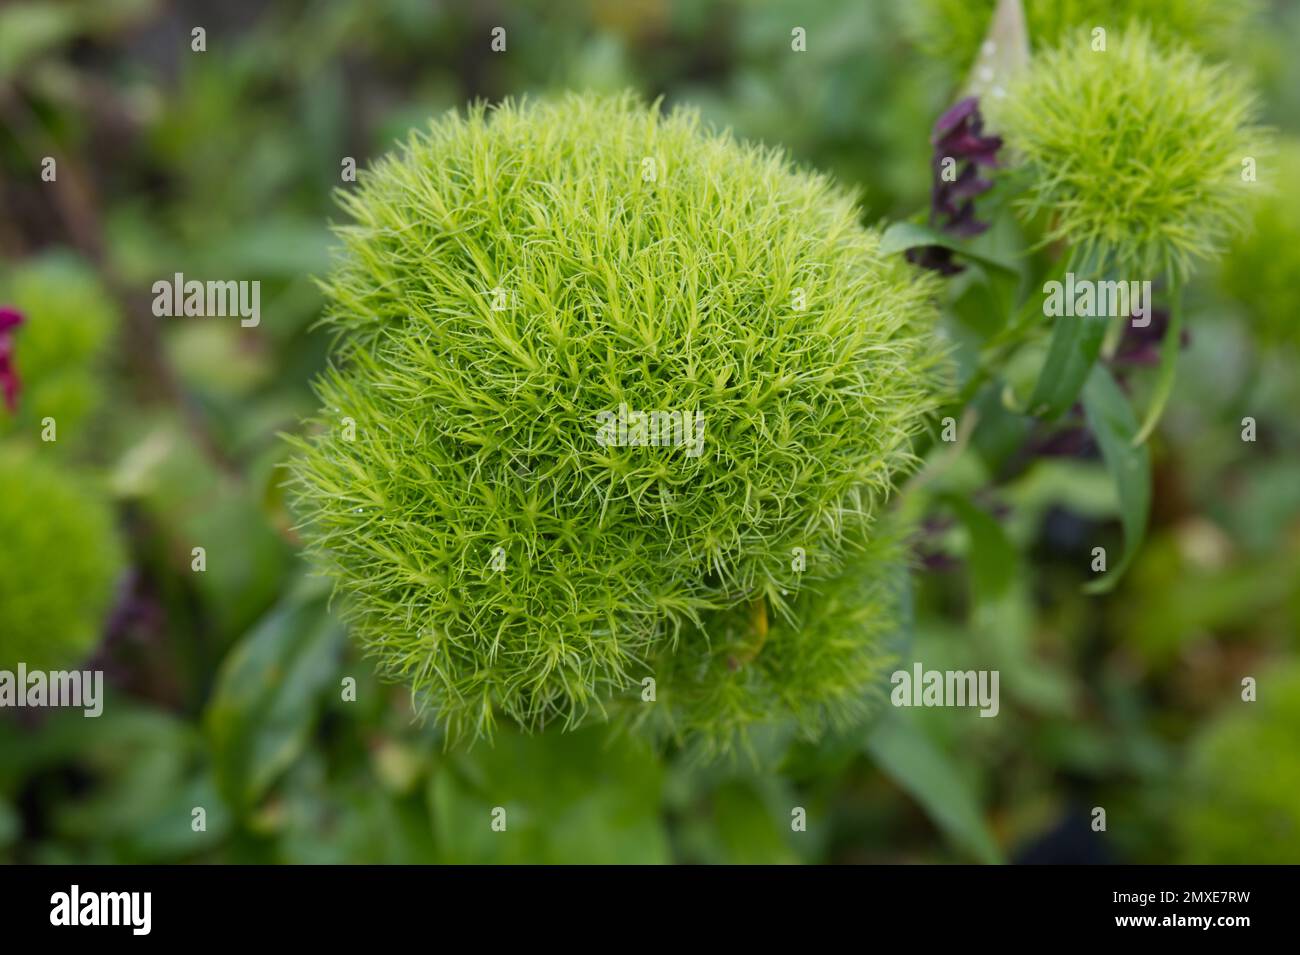 Unusual and vibrant flowers of Dianthus barbatus Green Trick, growing ...